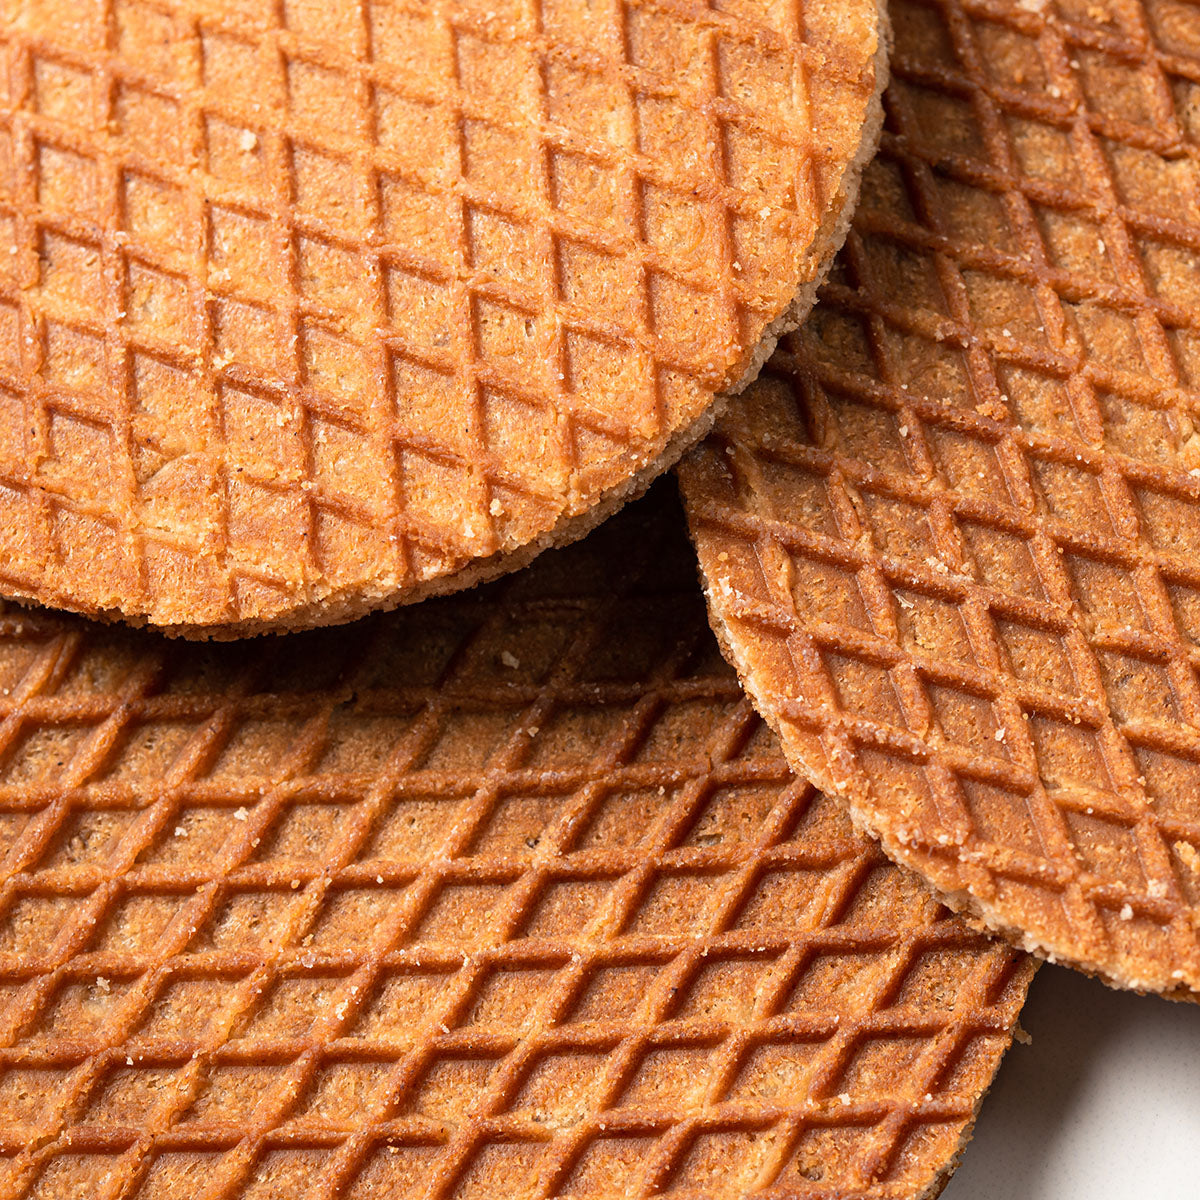 A group of Double Authentic Red Stroopwafel Tin Cans by Wonderen Stroopwafels on a white plate.